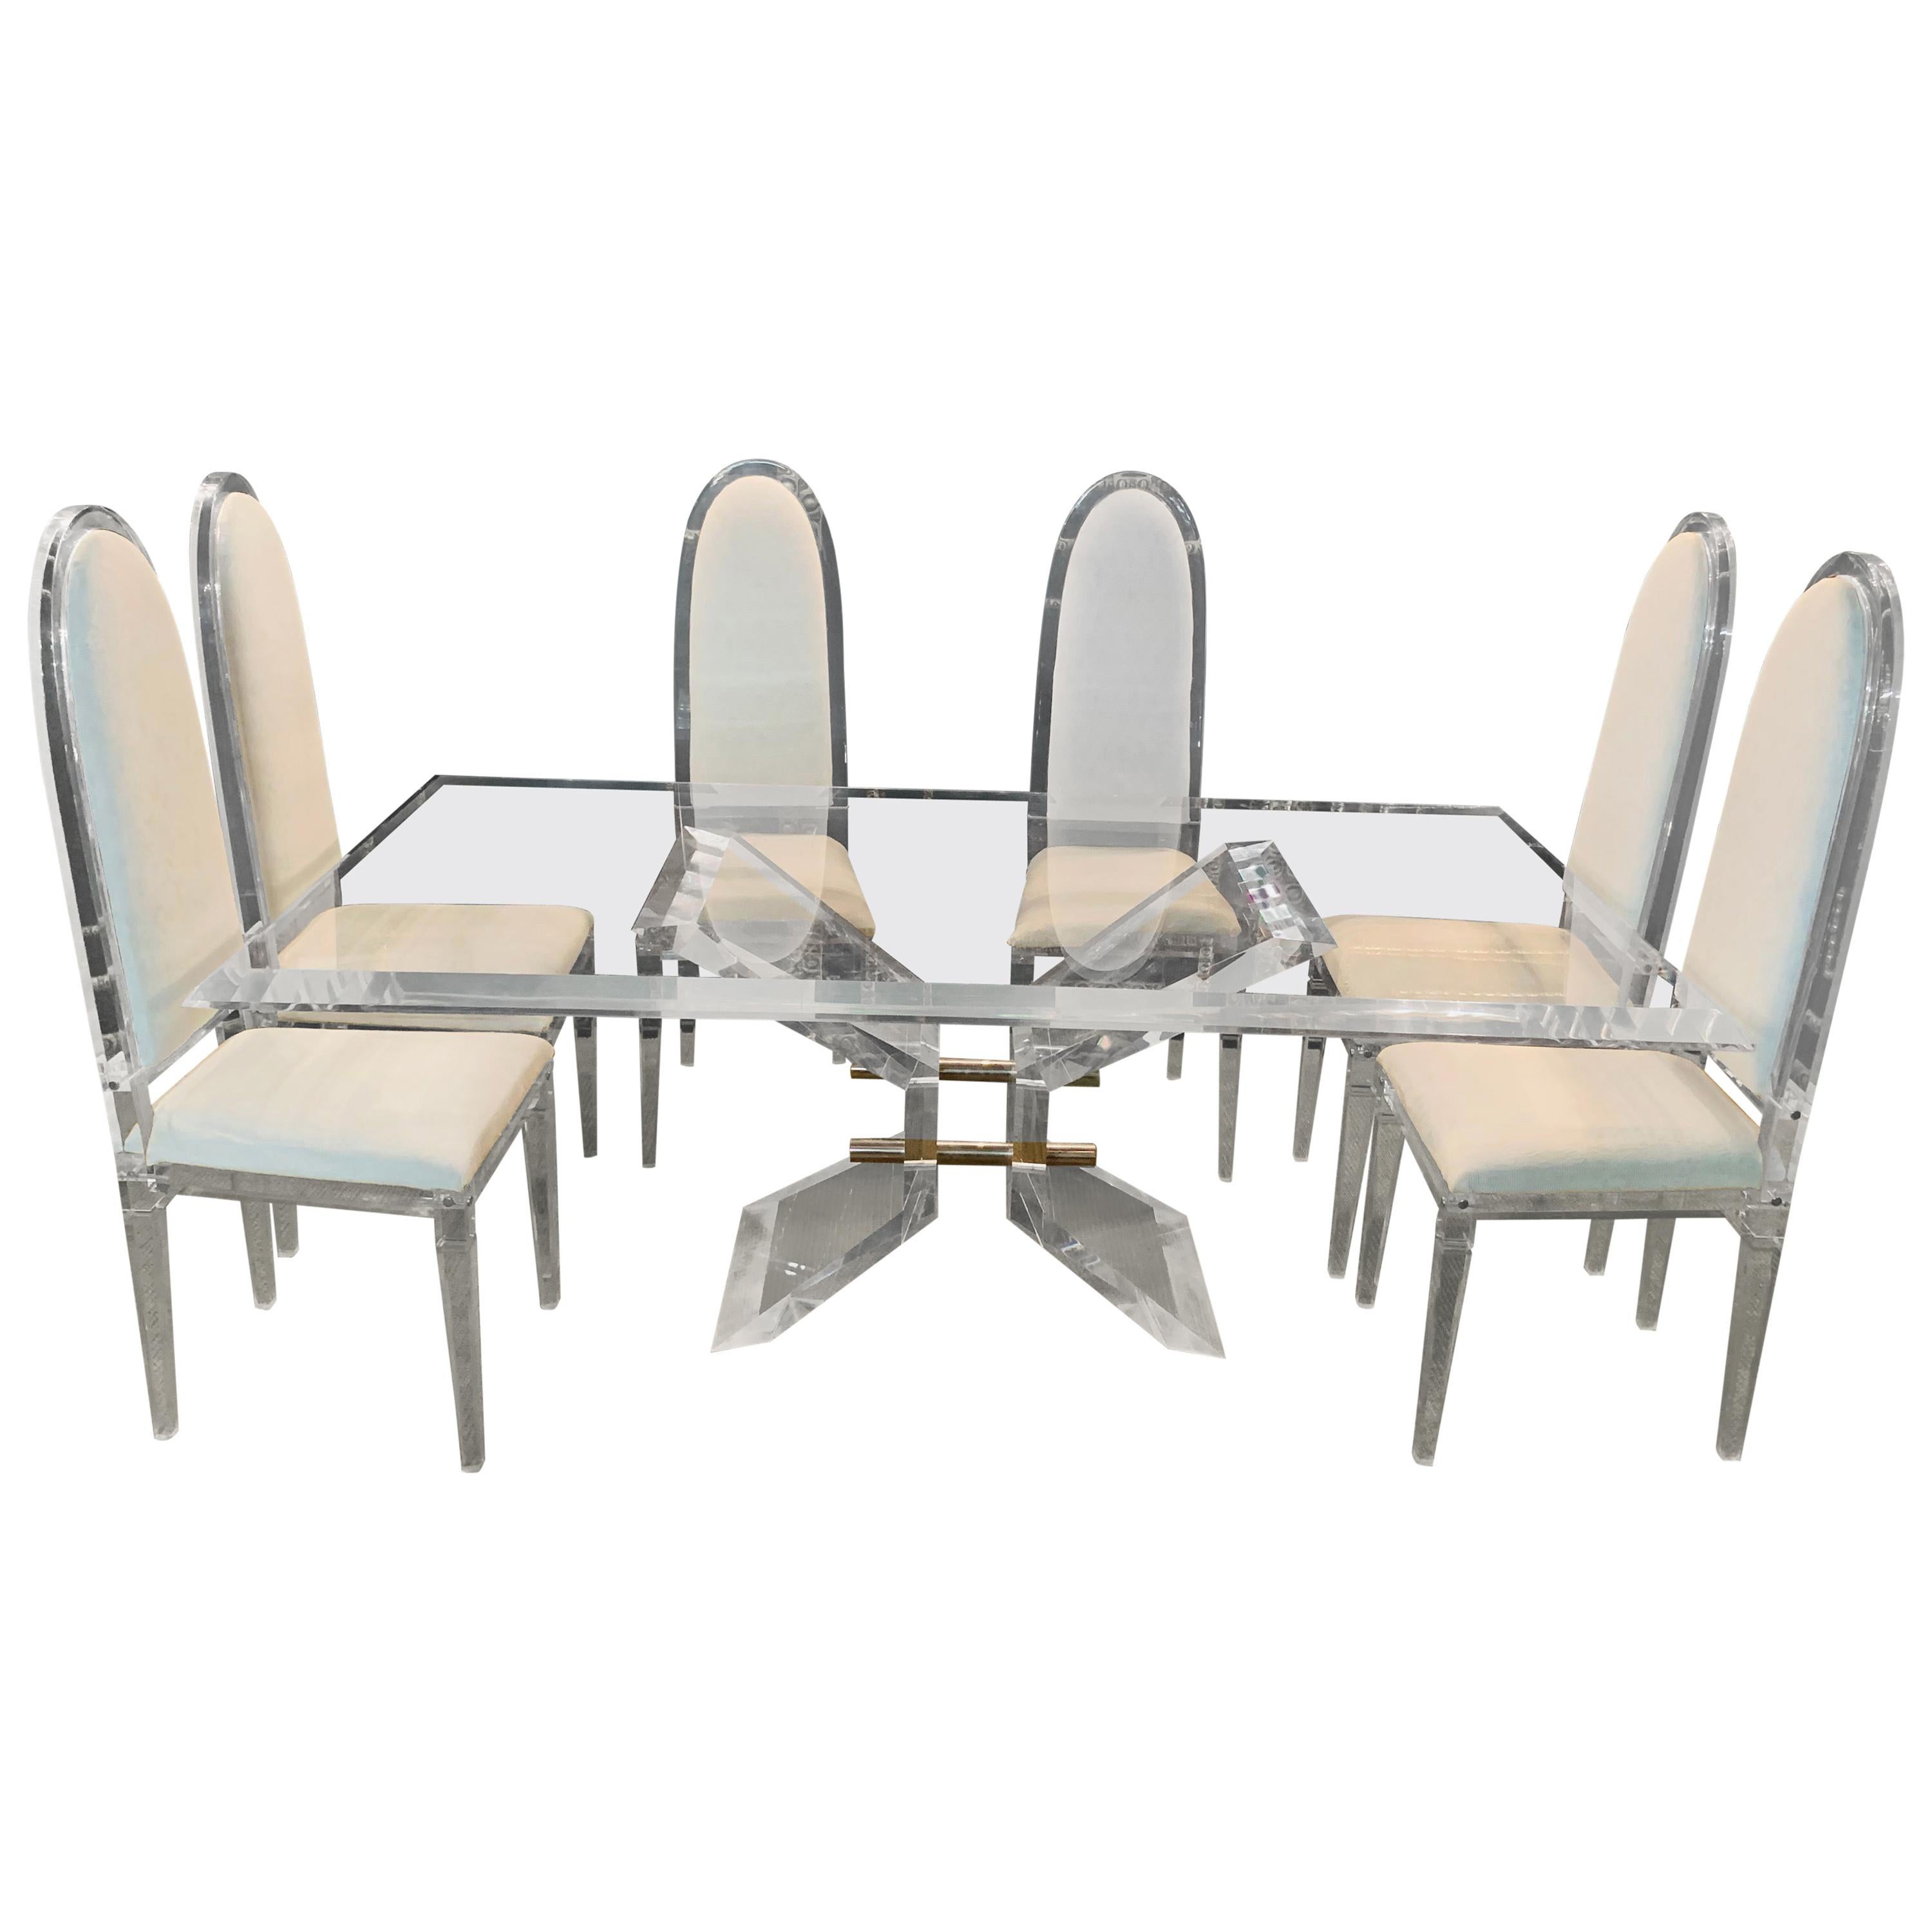 Designer Dining Table Acrylic Plexiglass Solid Dining Room Table with Chairs